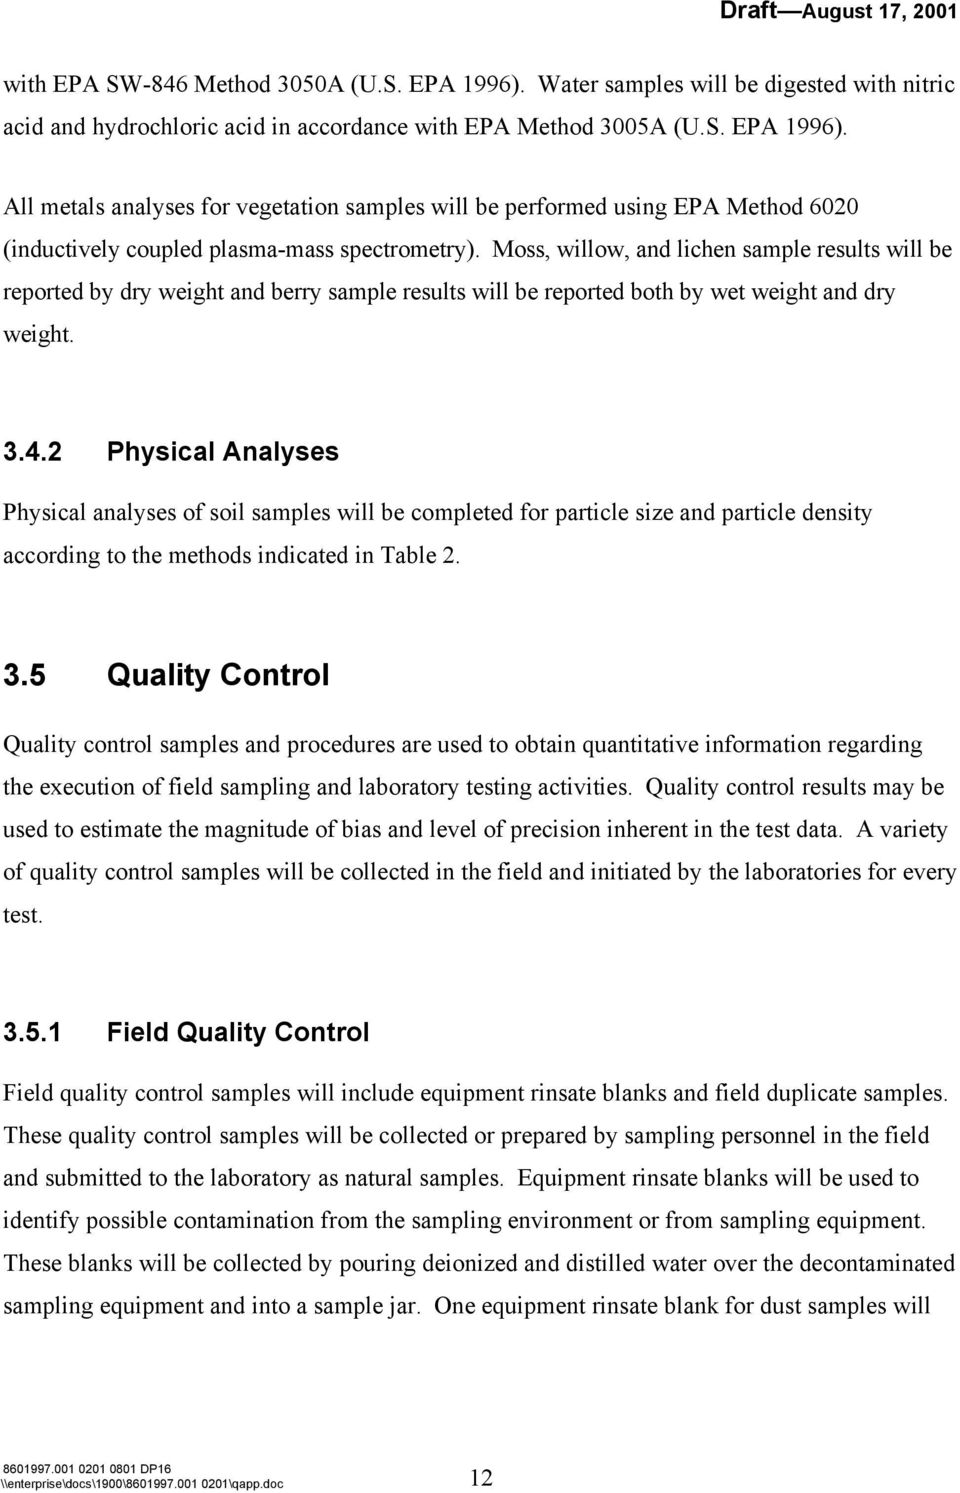 2 Physical Analyses Physical analyses of soil samples will be completed for particle size and particle density according to the methods indicated in Table 2. 3.